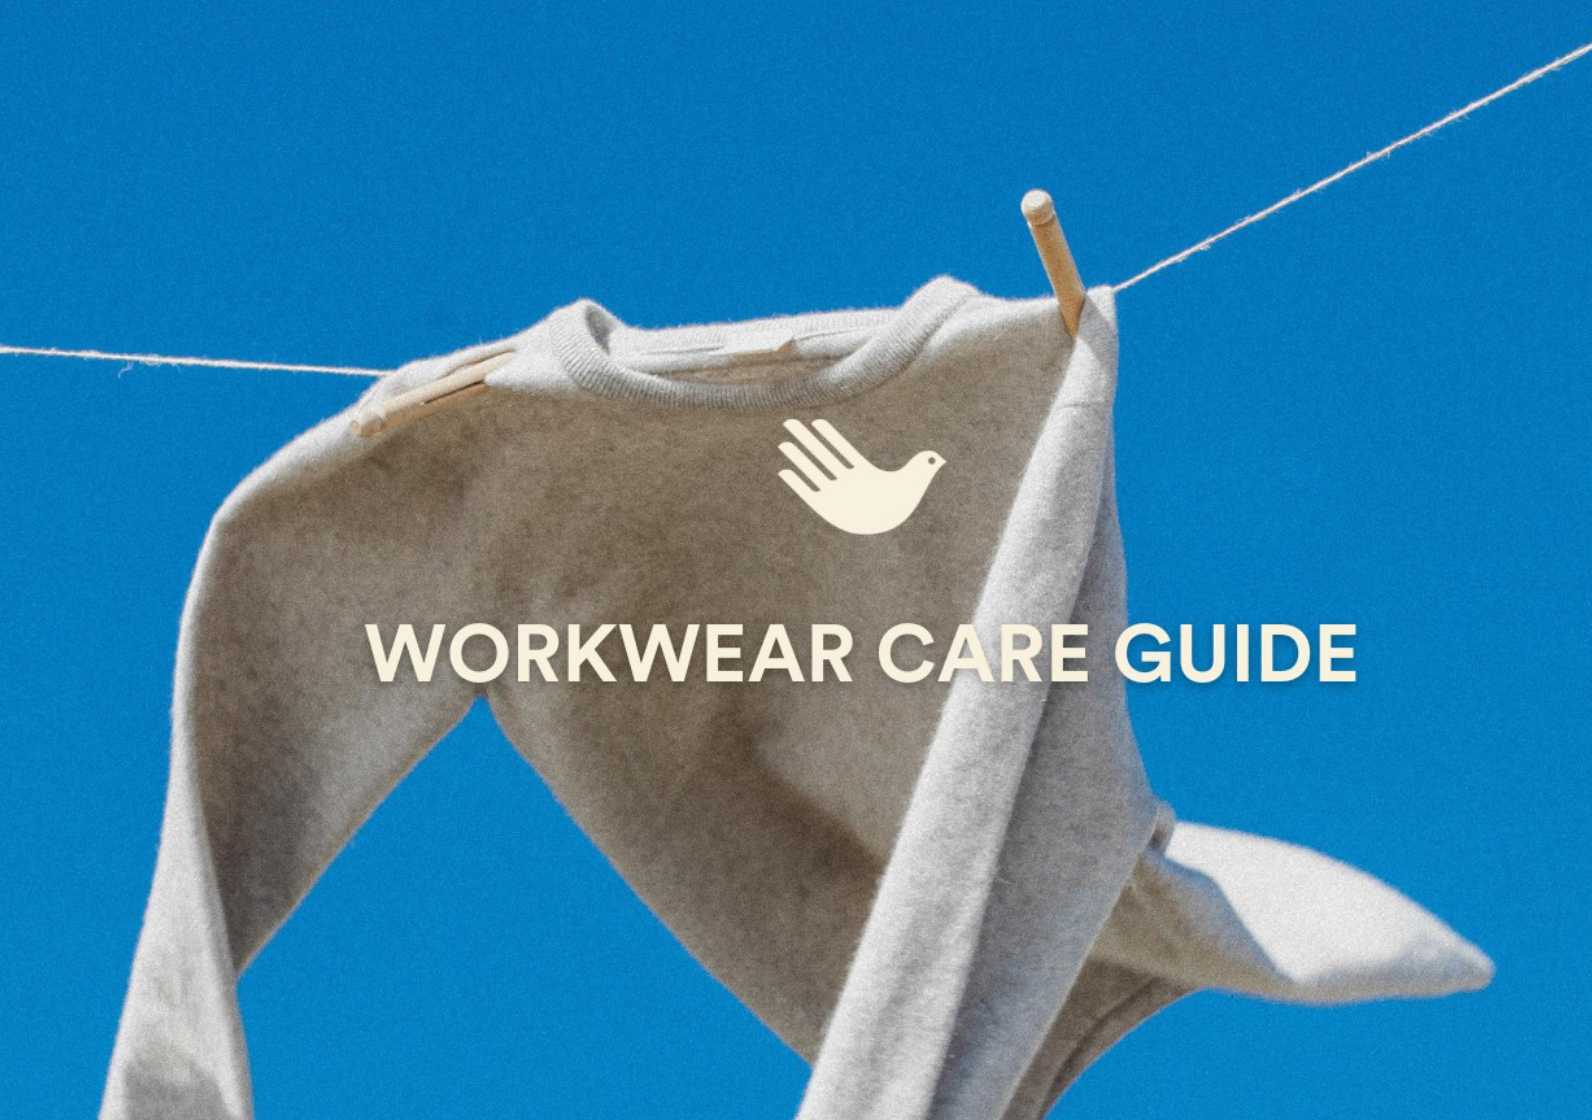 How To Care for Your Workwear, So It Lasts Longer